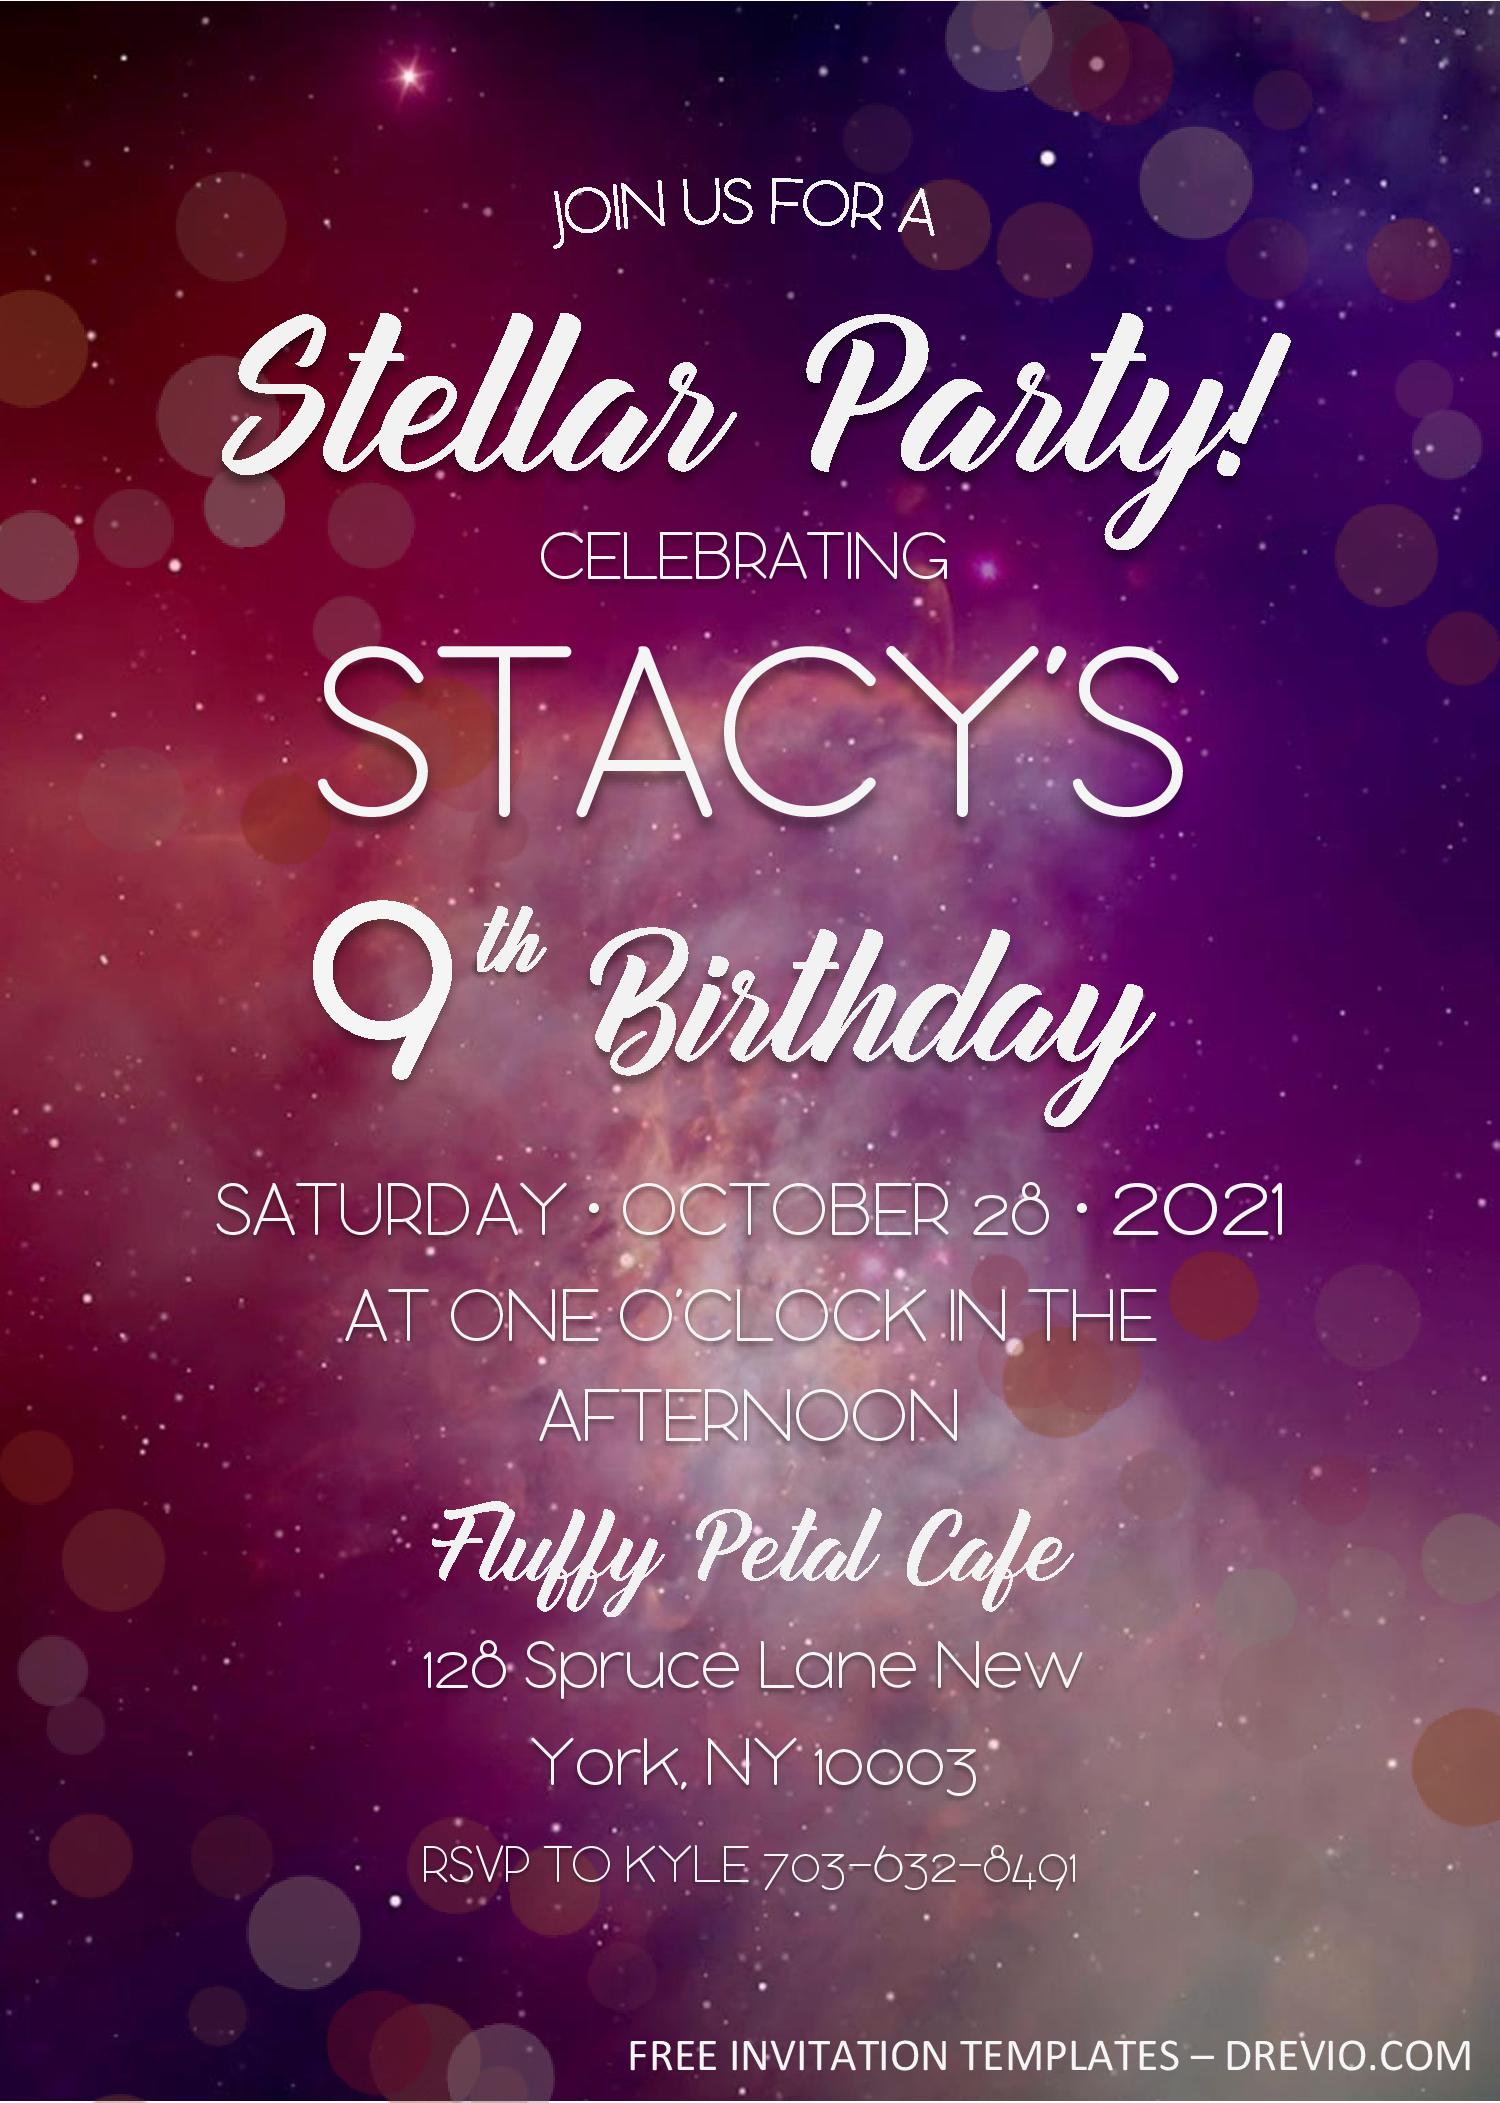 Galaxy Birthday Invitation Templates Editable With Ms Word Download Hundreds Free Printable Birthday Invitation Templates